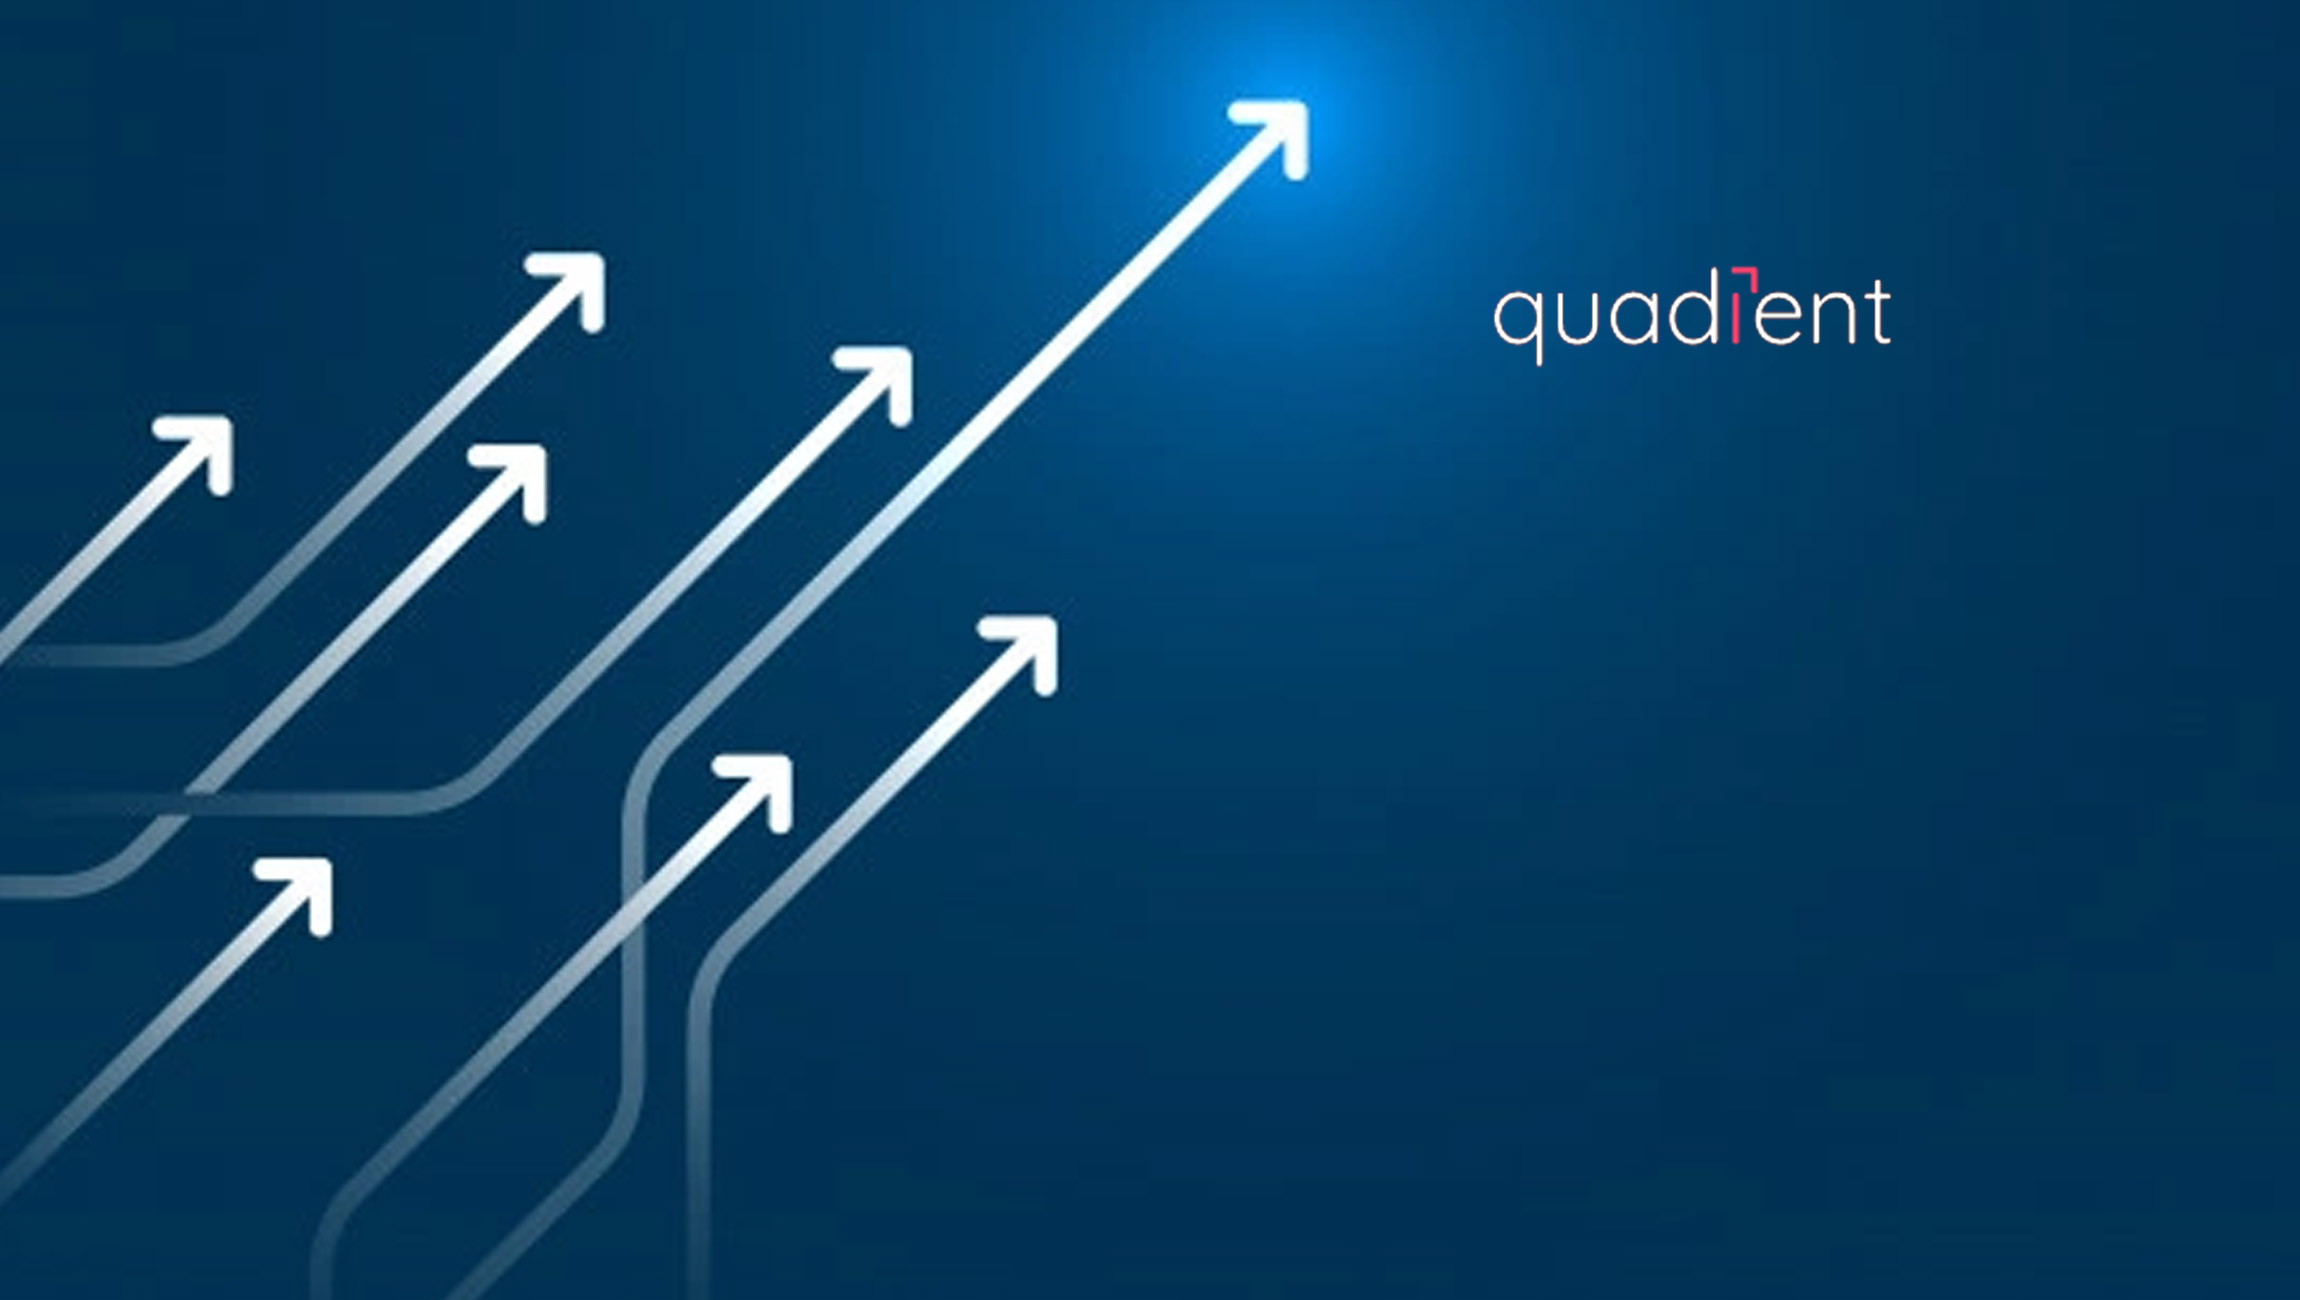 Quadient’s Cloud-based Software Business Experiences Strong Adoption with Growth in New Customers and Usage